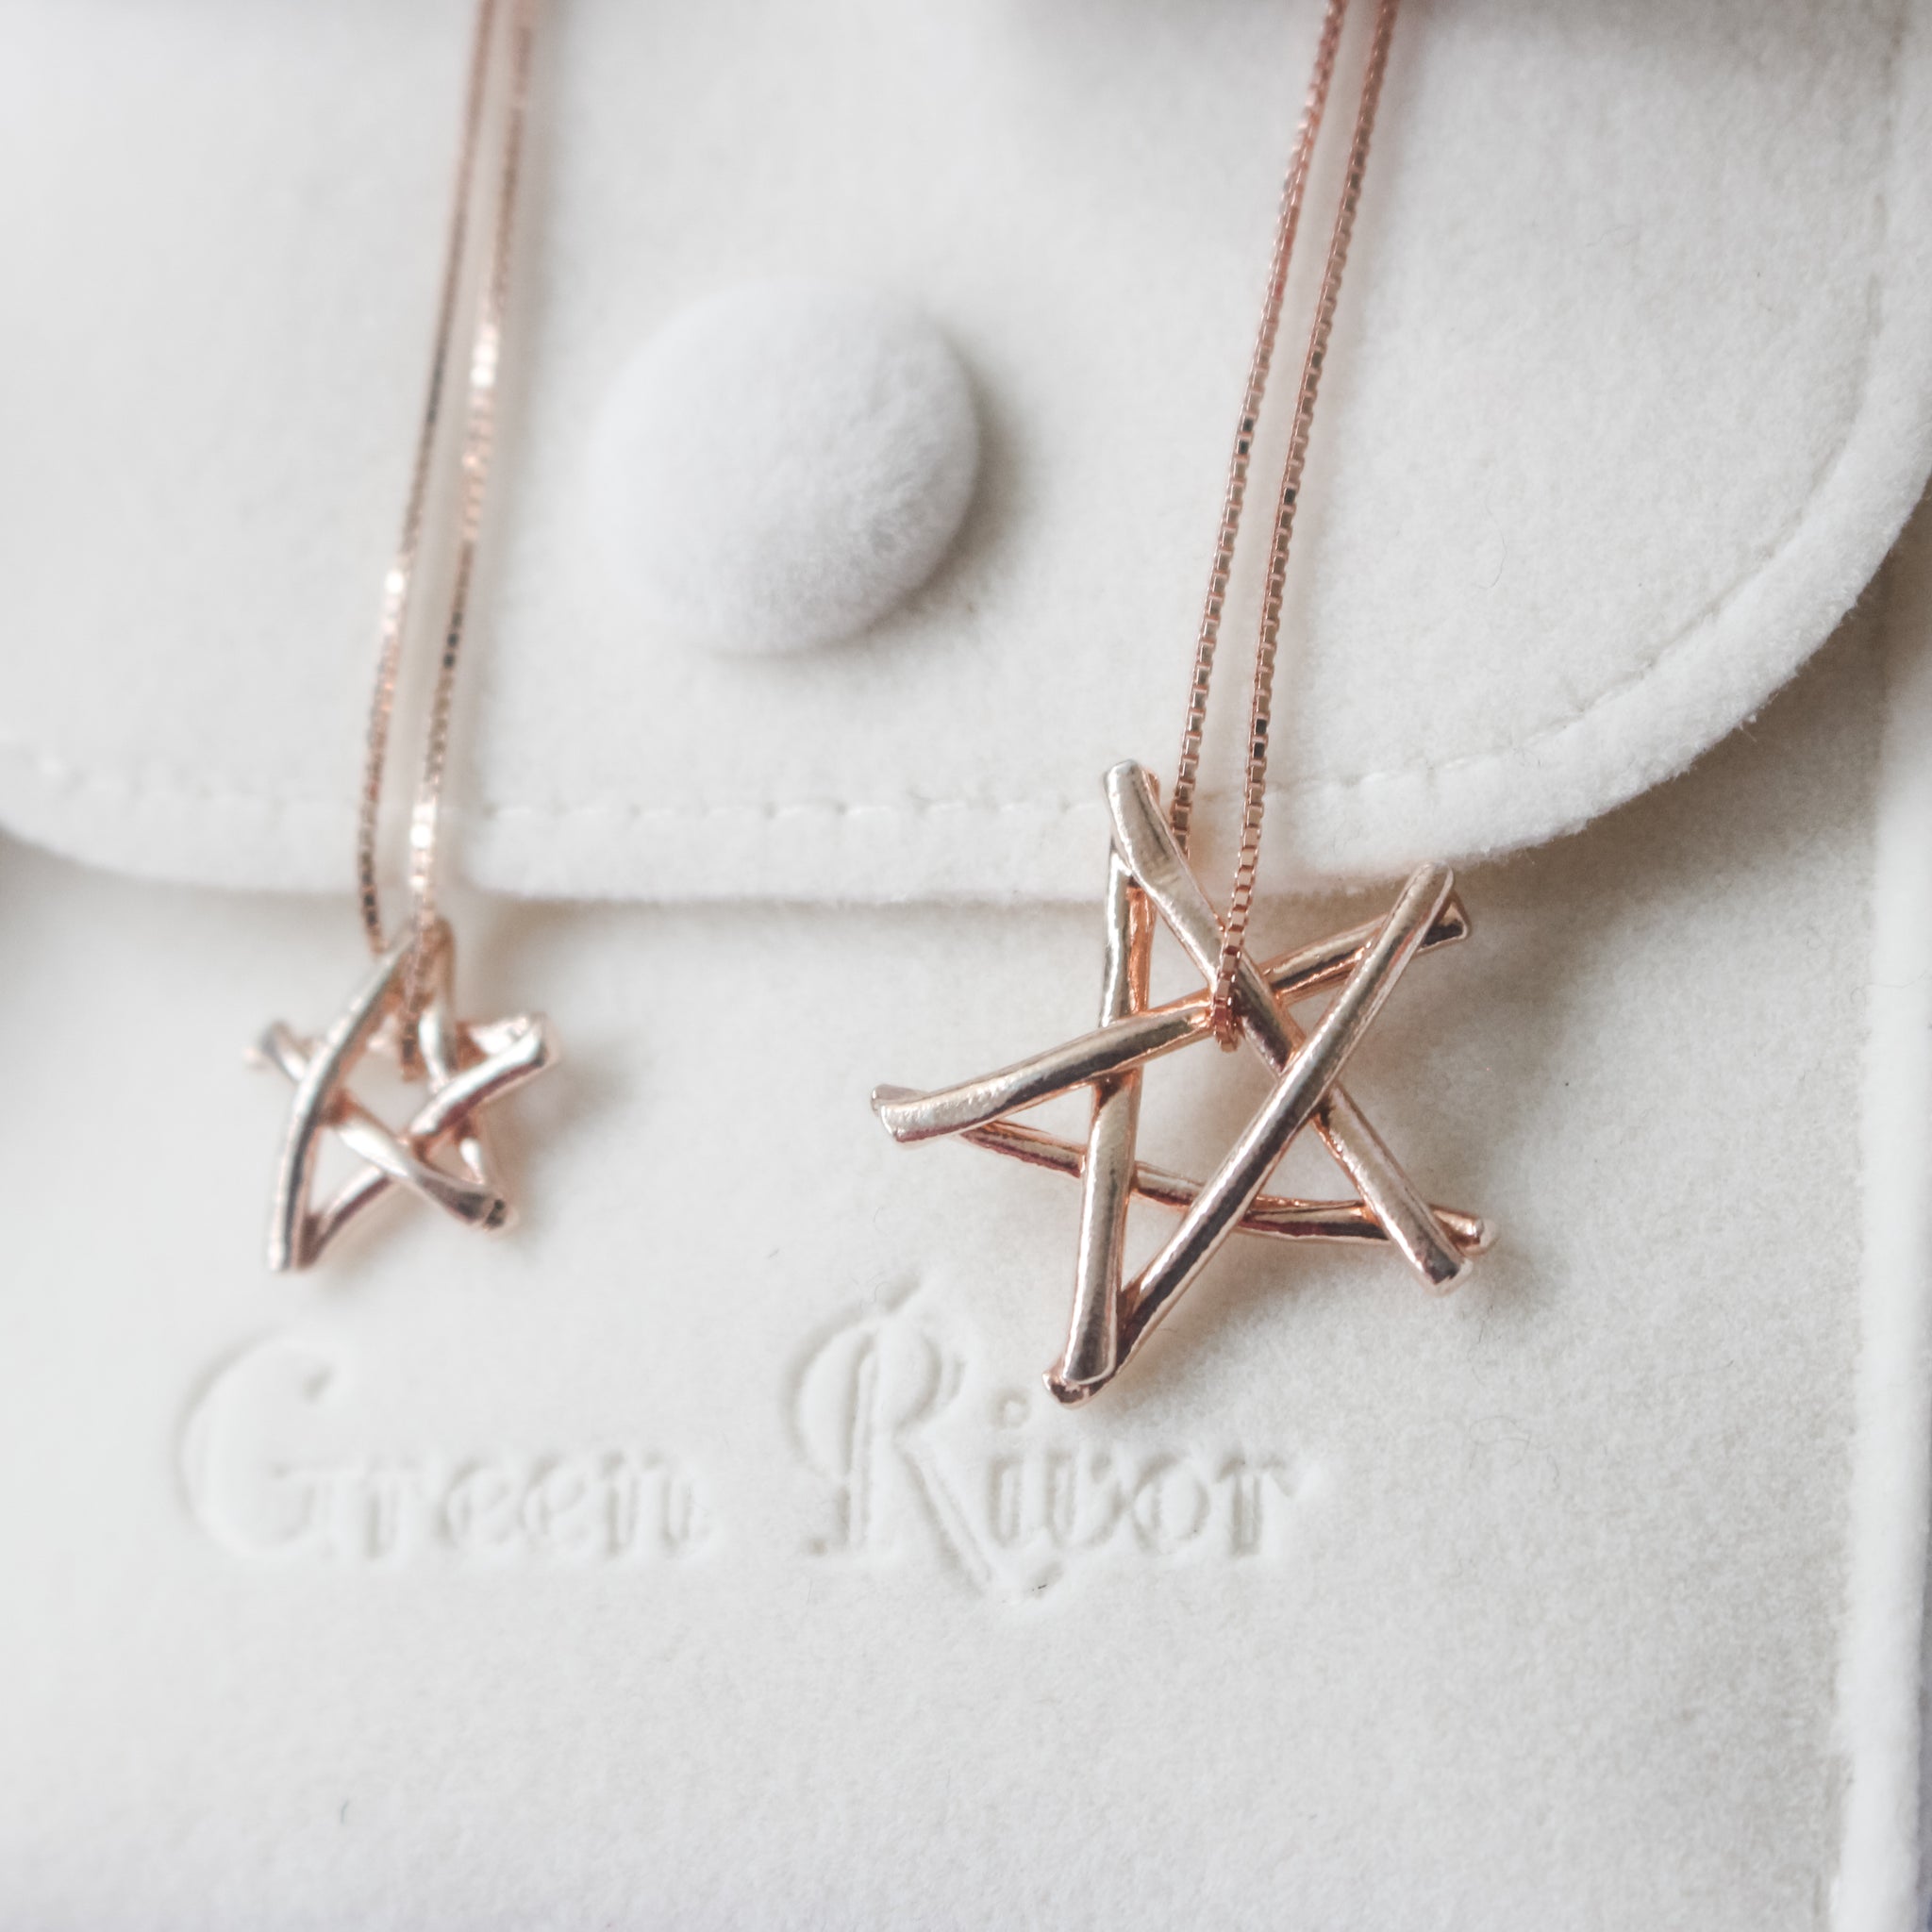 Small Matchstick Star Necklace in Sterling Silver / Toothpick Star Silver Necklace / Silver Star Necklace / Christmas Star Necklace